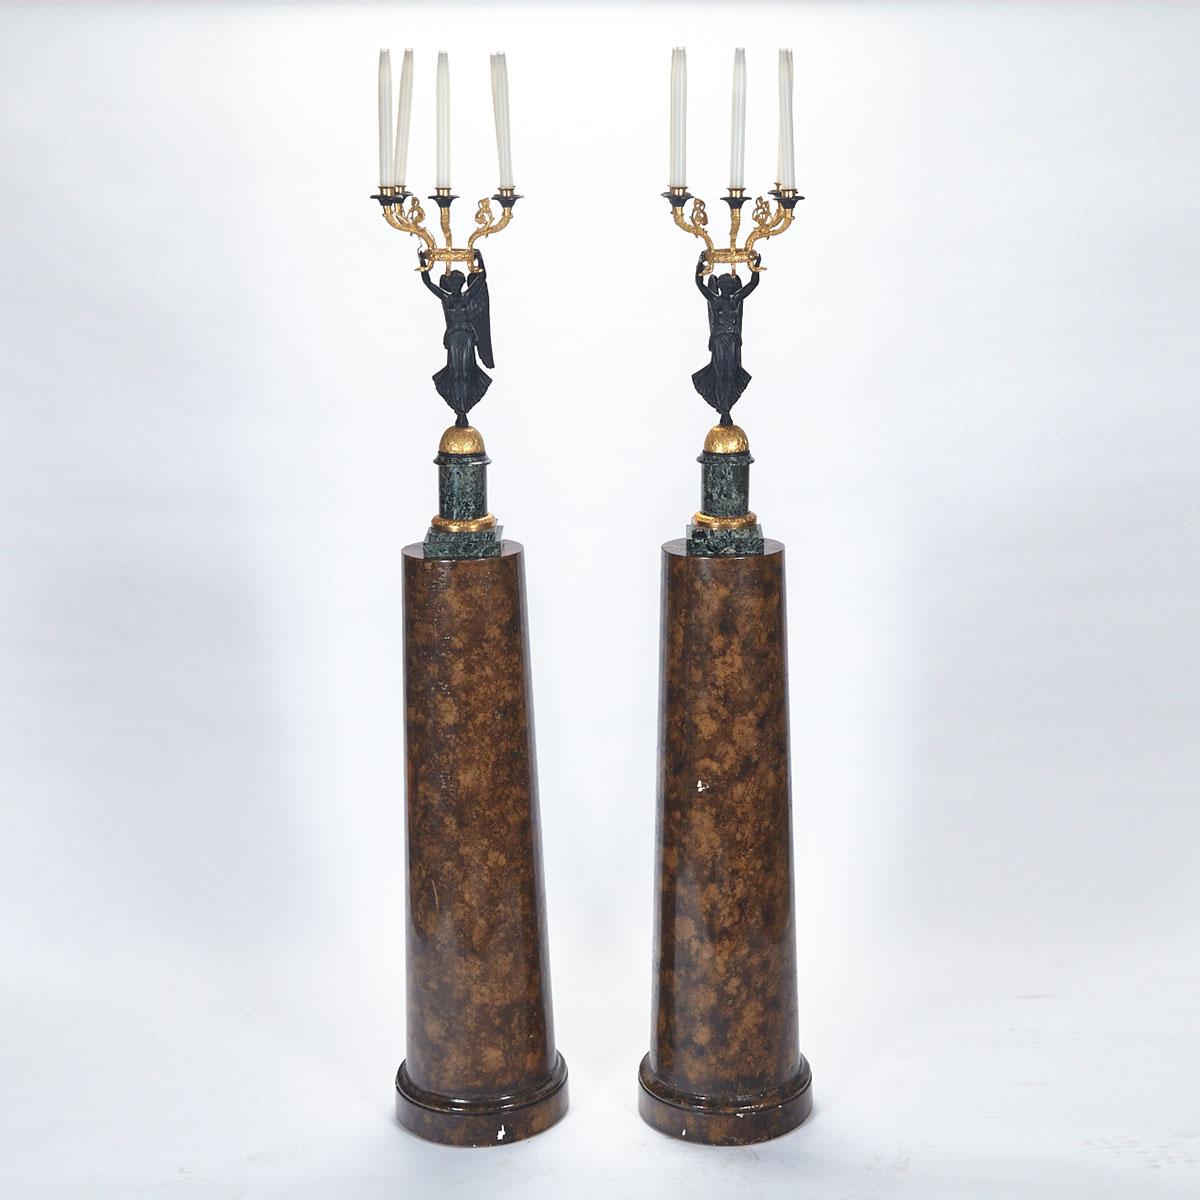 Pair of French Empire Style Gilt and Patinated Bronze Figural Candelabra, on Faux Marble Columns, 20th century